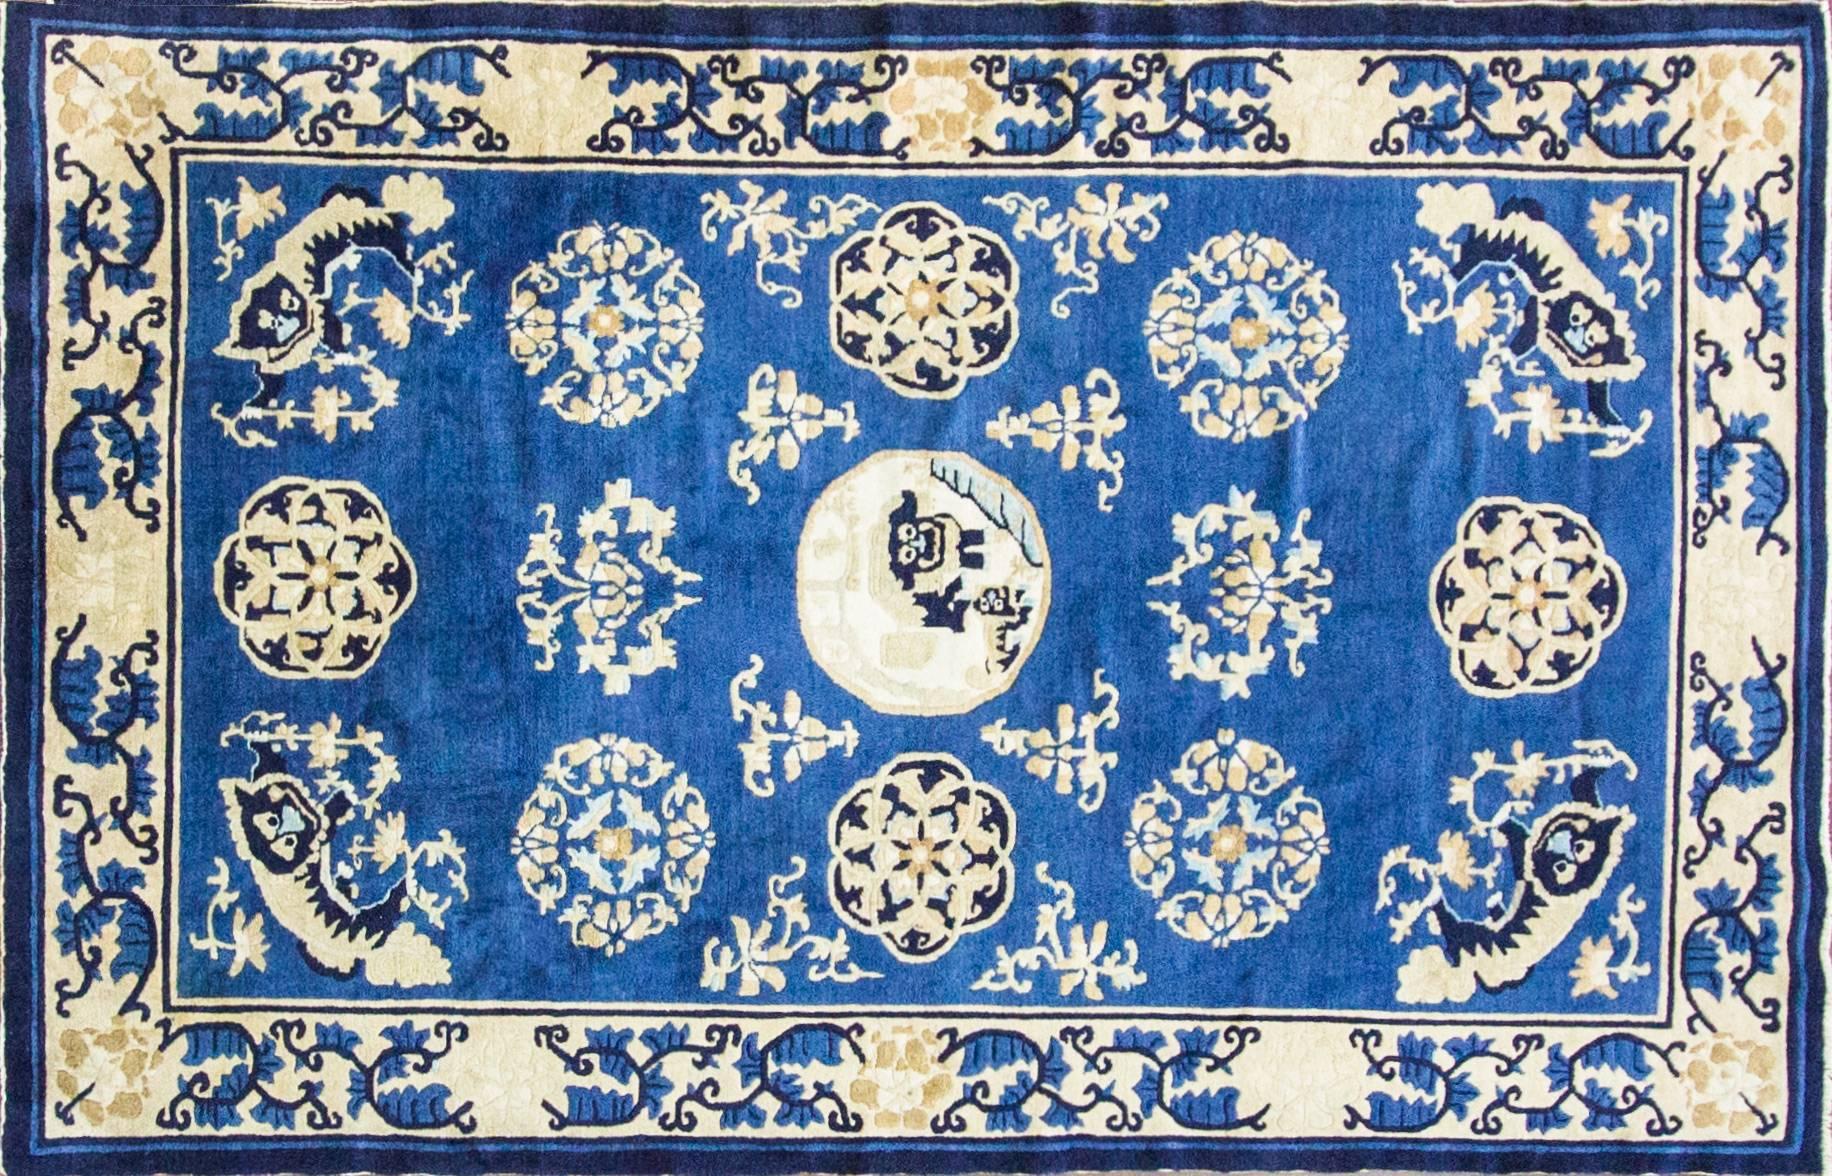 Great and superb quality with beautiful light blue background and camel border color, the design is very unusual it seems to be Chinese Panda.
Antique Peking rugs started in China shortly after the end of the First World War. During this period,